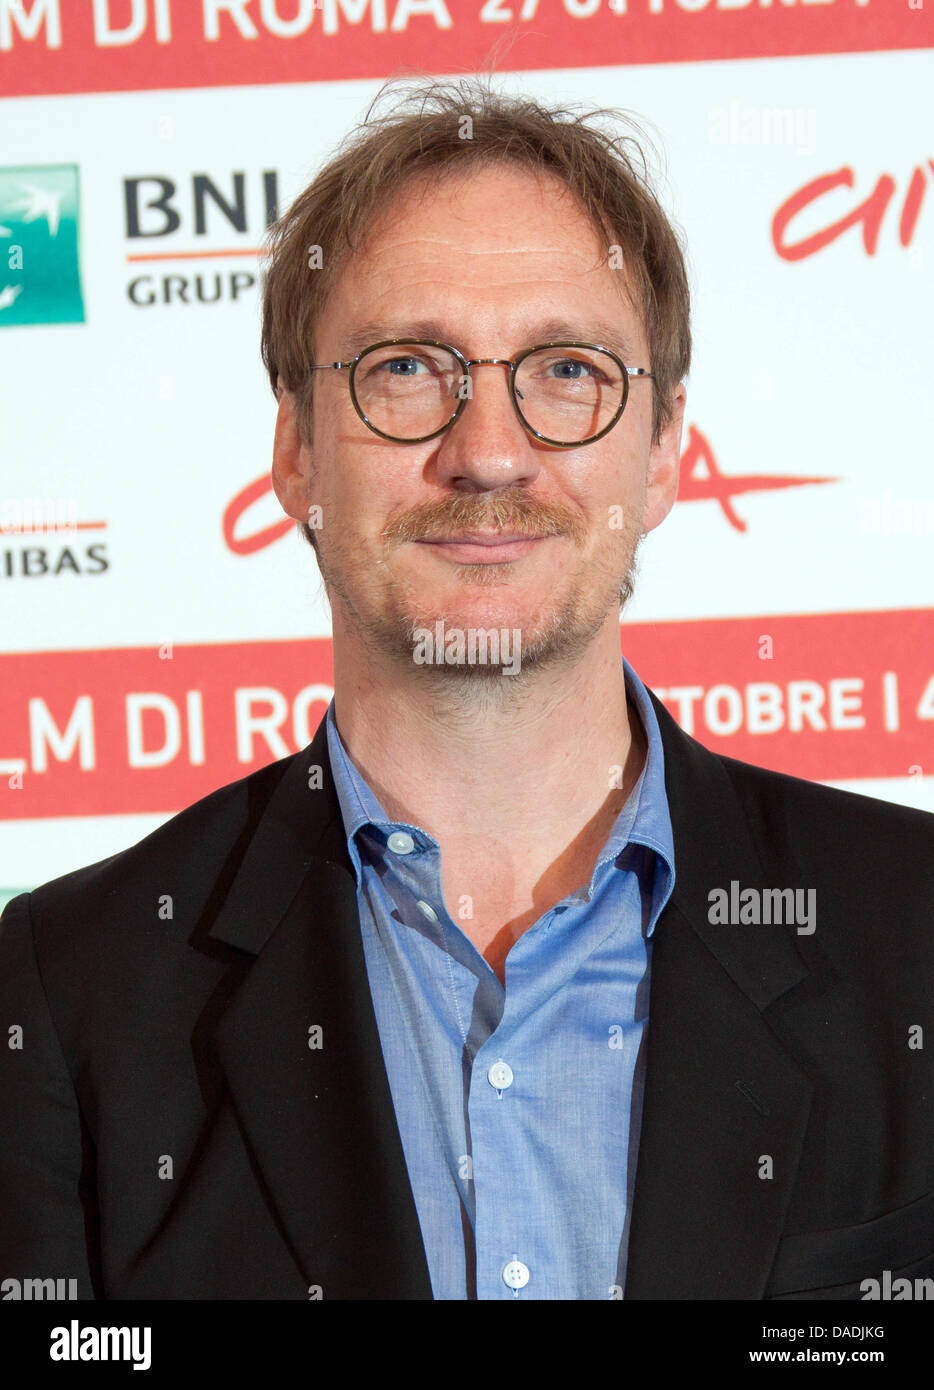 British actor David Thewlis attends the photocall of the movie 'The Lady' during the 6th International Rome Film Festival at Auditorium Parco Della Musica in Rome, Italy, 27 October 2011. Photo: Hubert Boesl Stock Photo